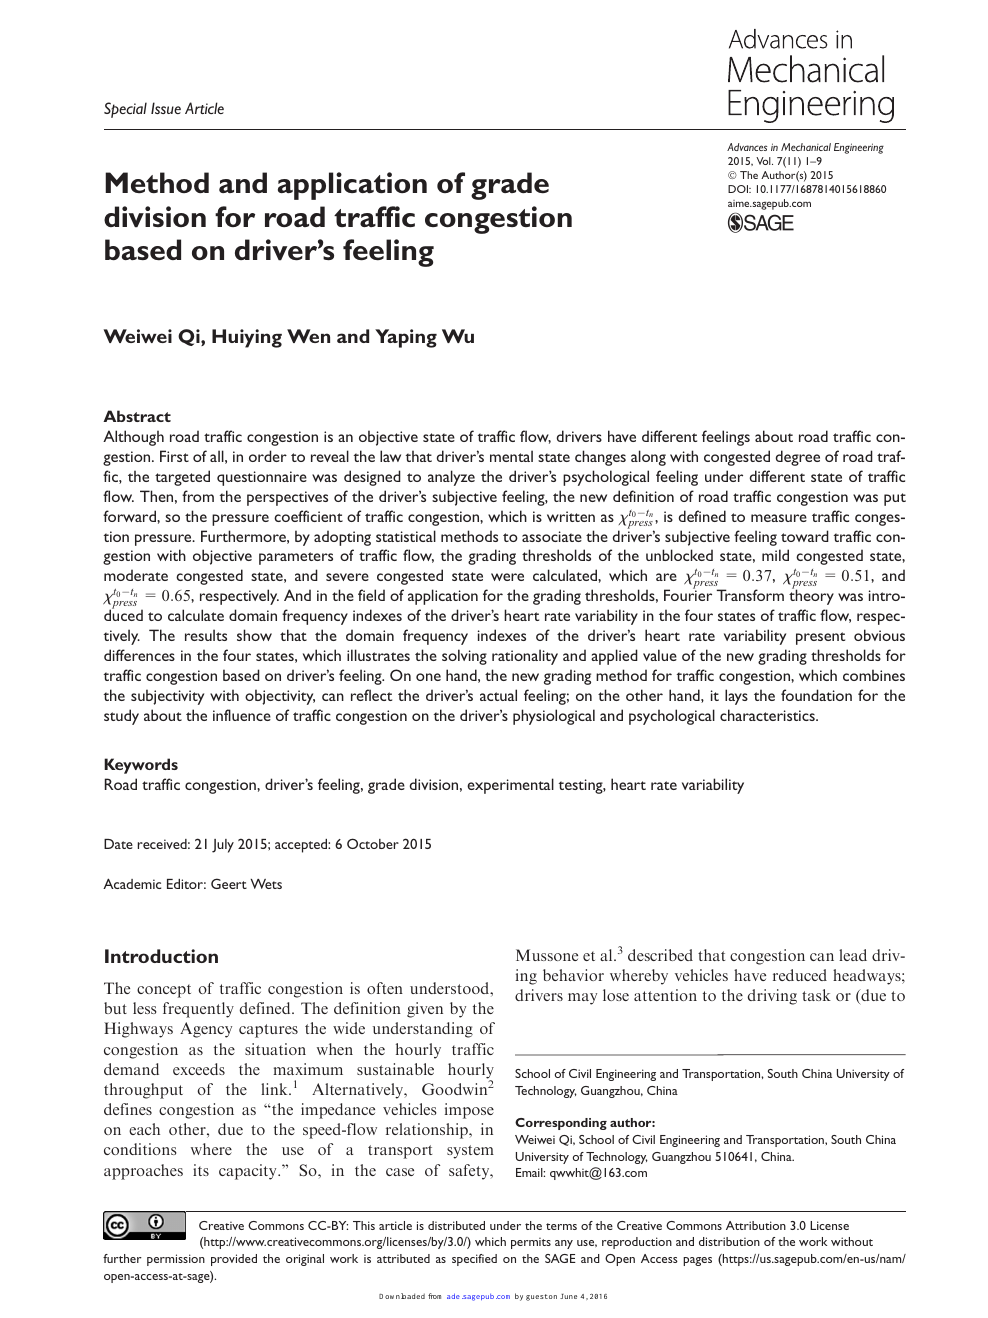 traffic congestion research paper